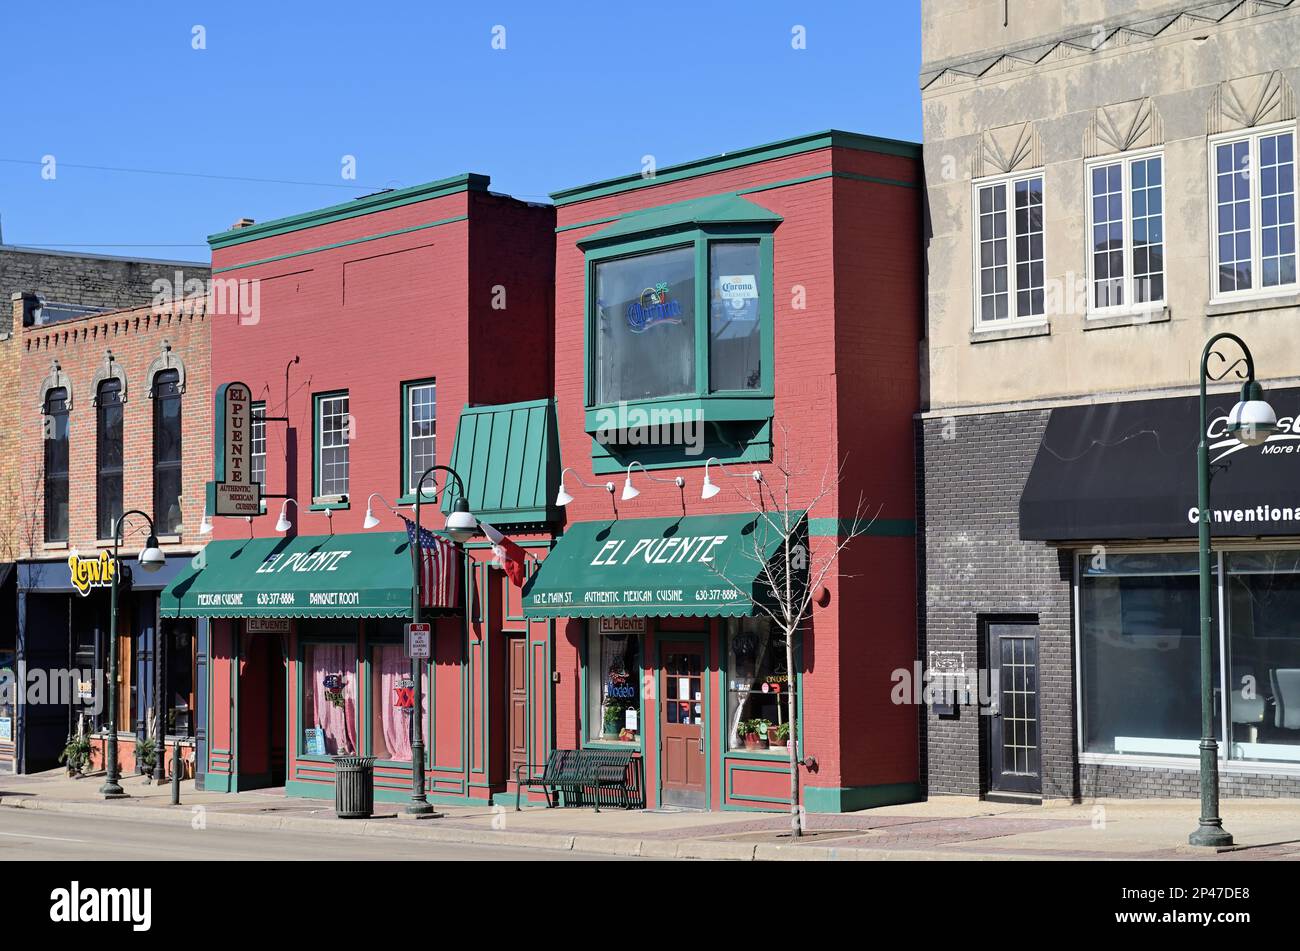 St. Charles, Illinois, USA. Some colorful building facades on an empty street in a small Illinois community. Stock Photo